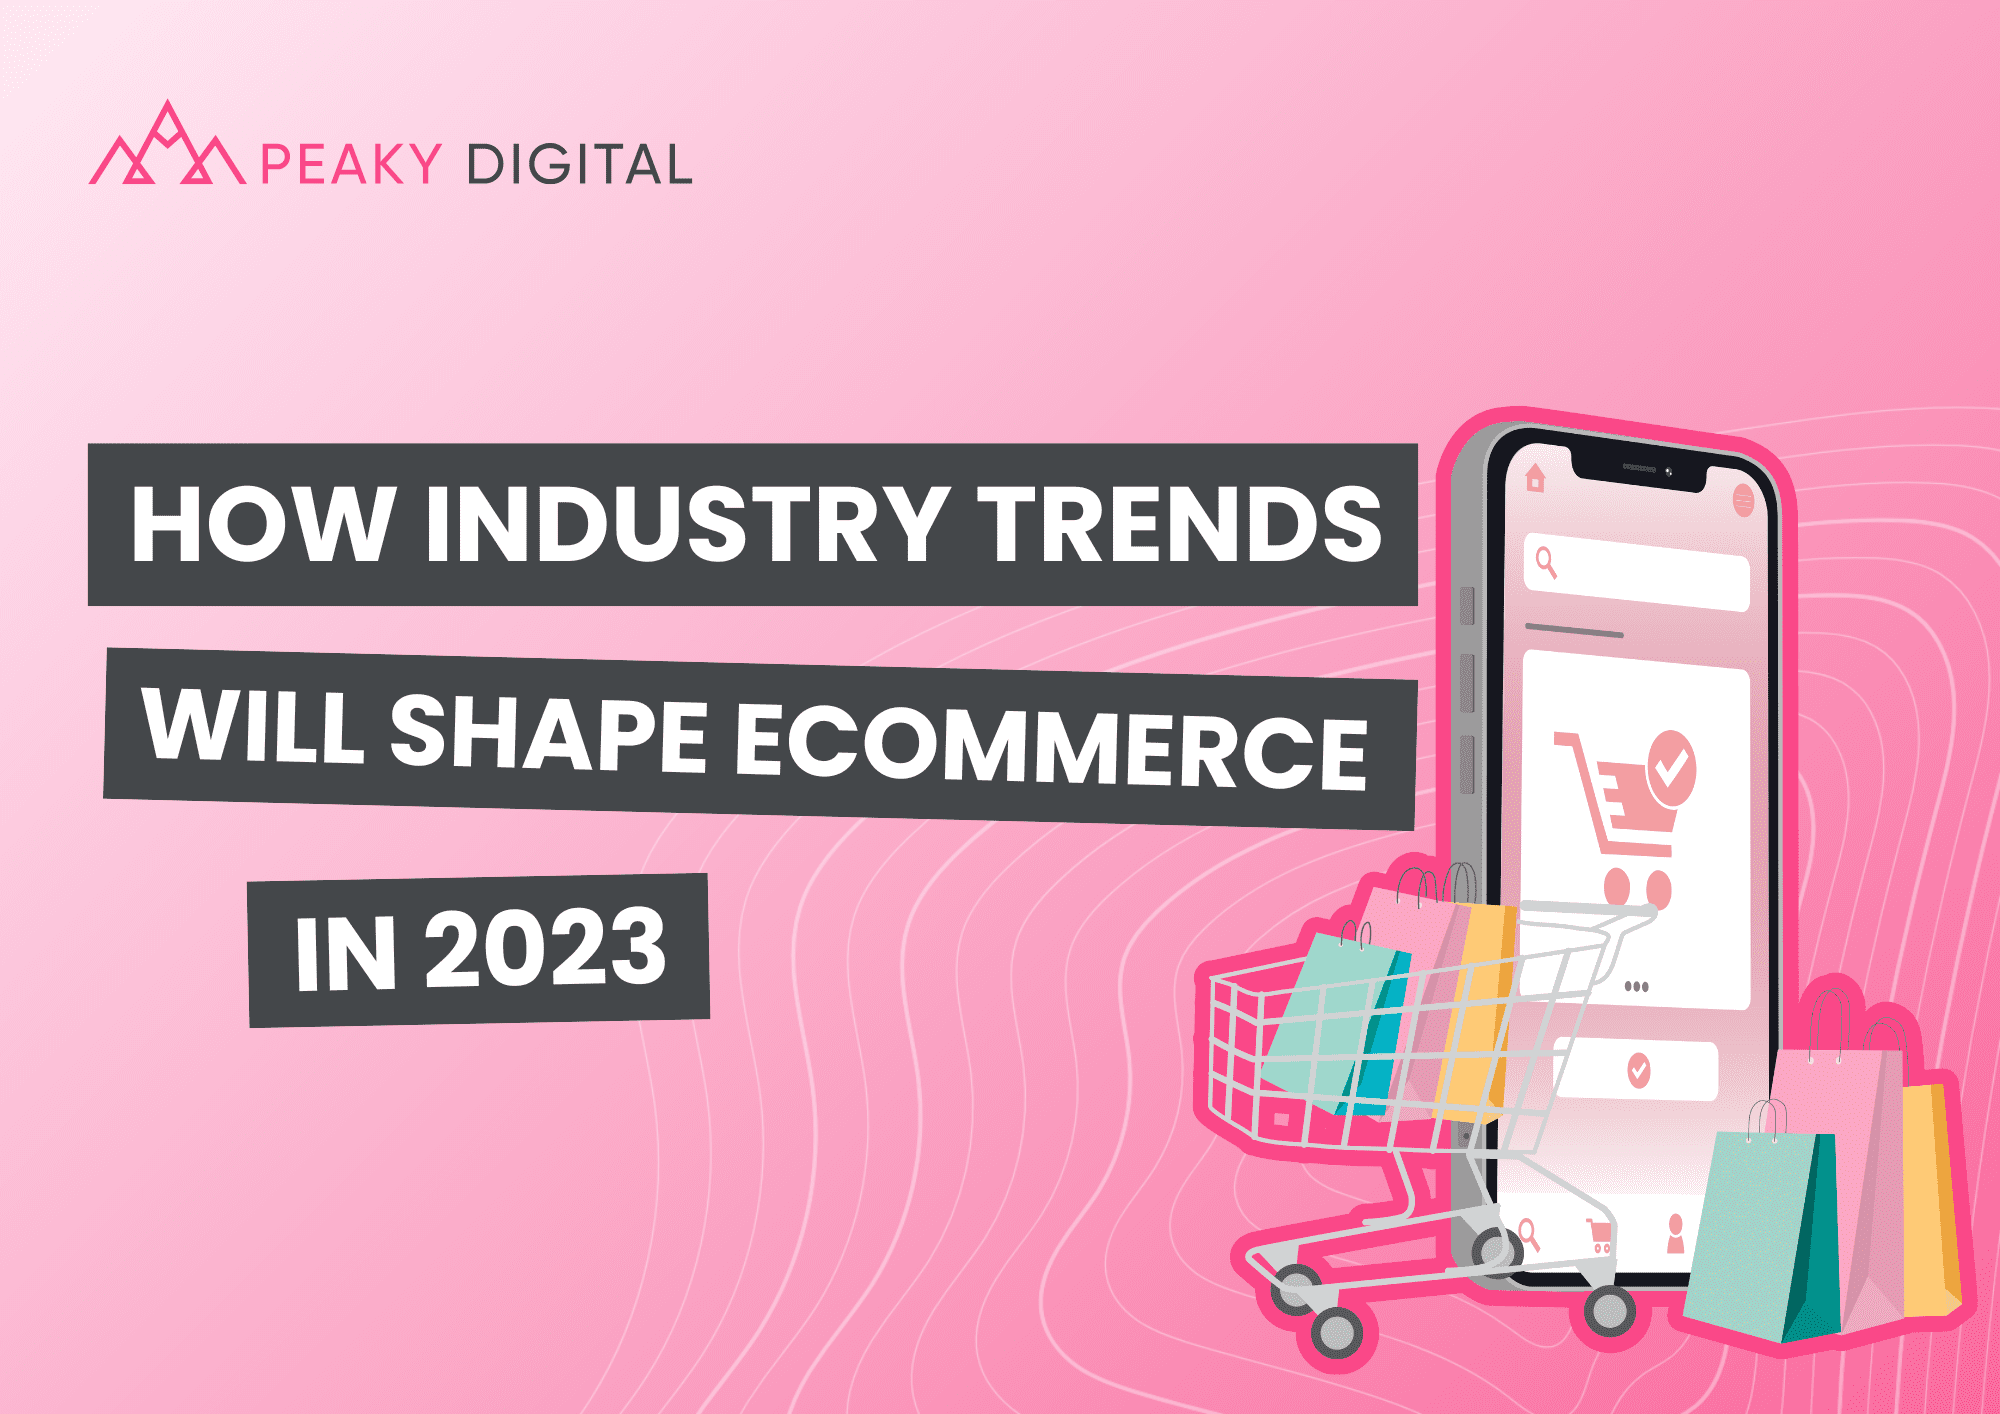 How Industry Trends Will Shape eCommerce in 2023